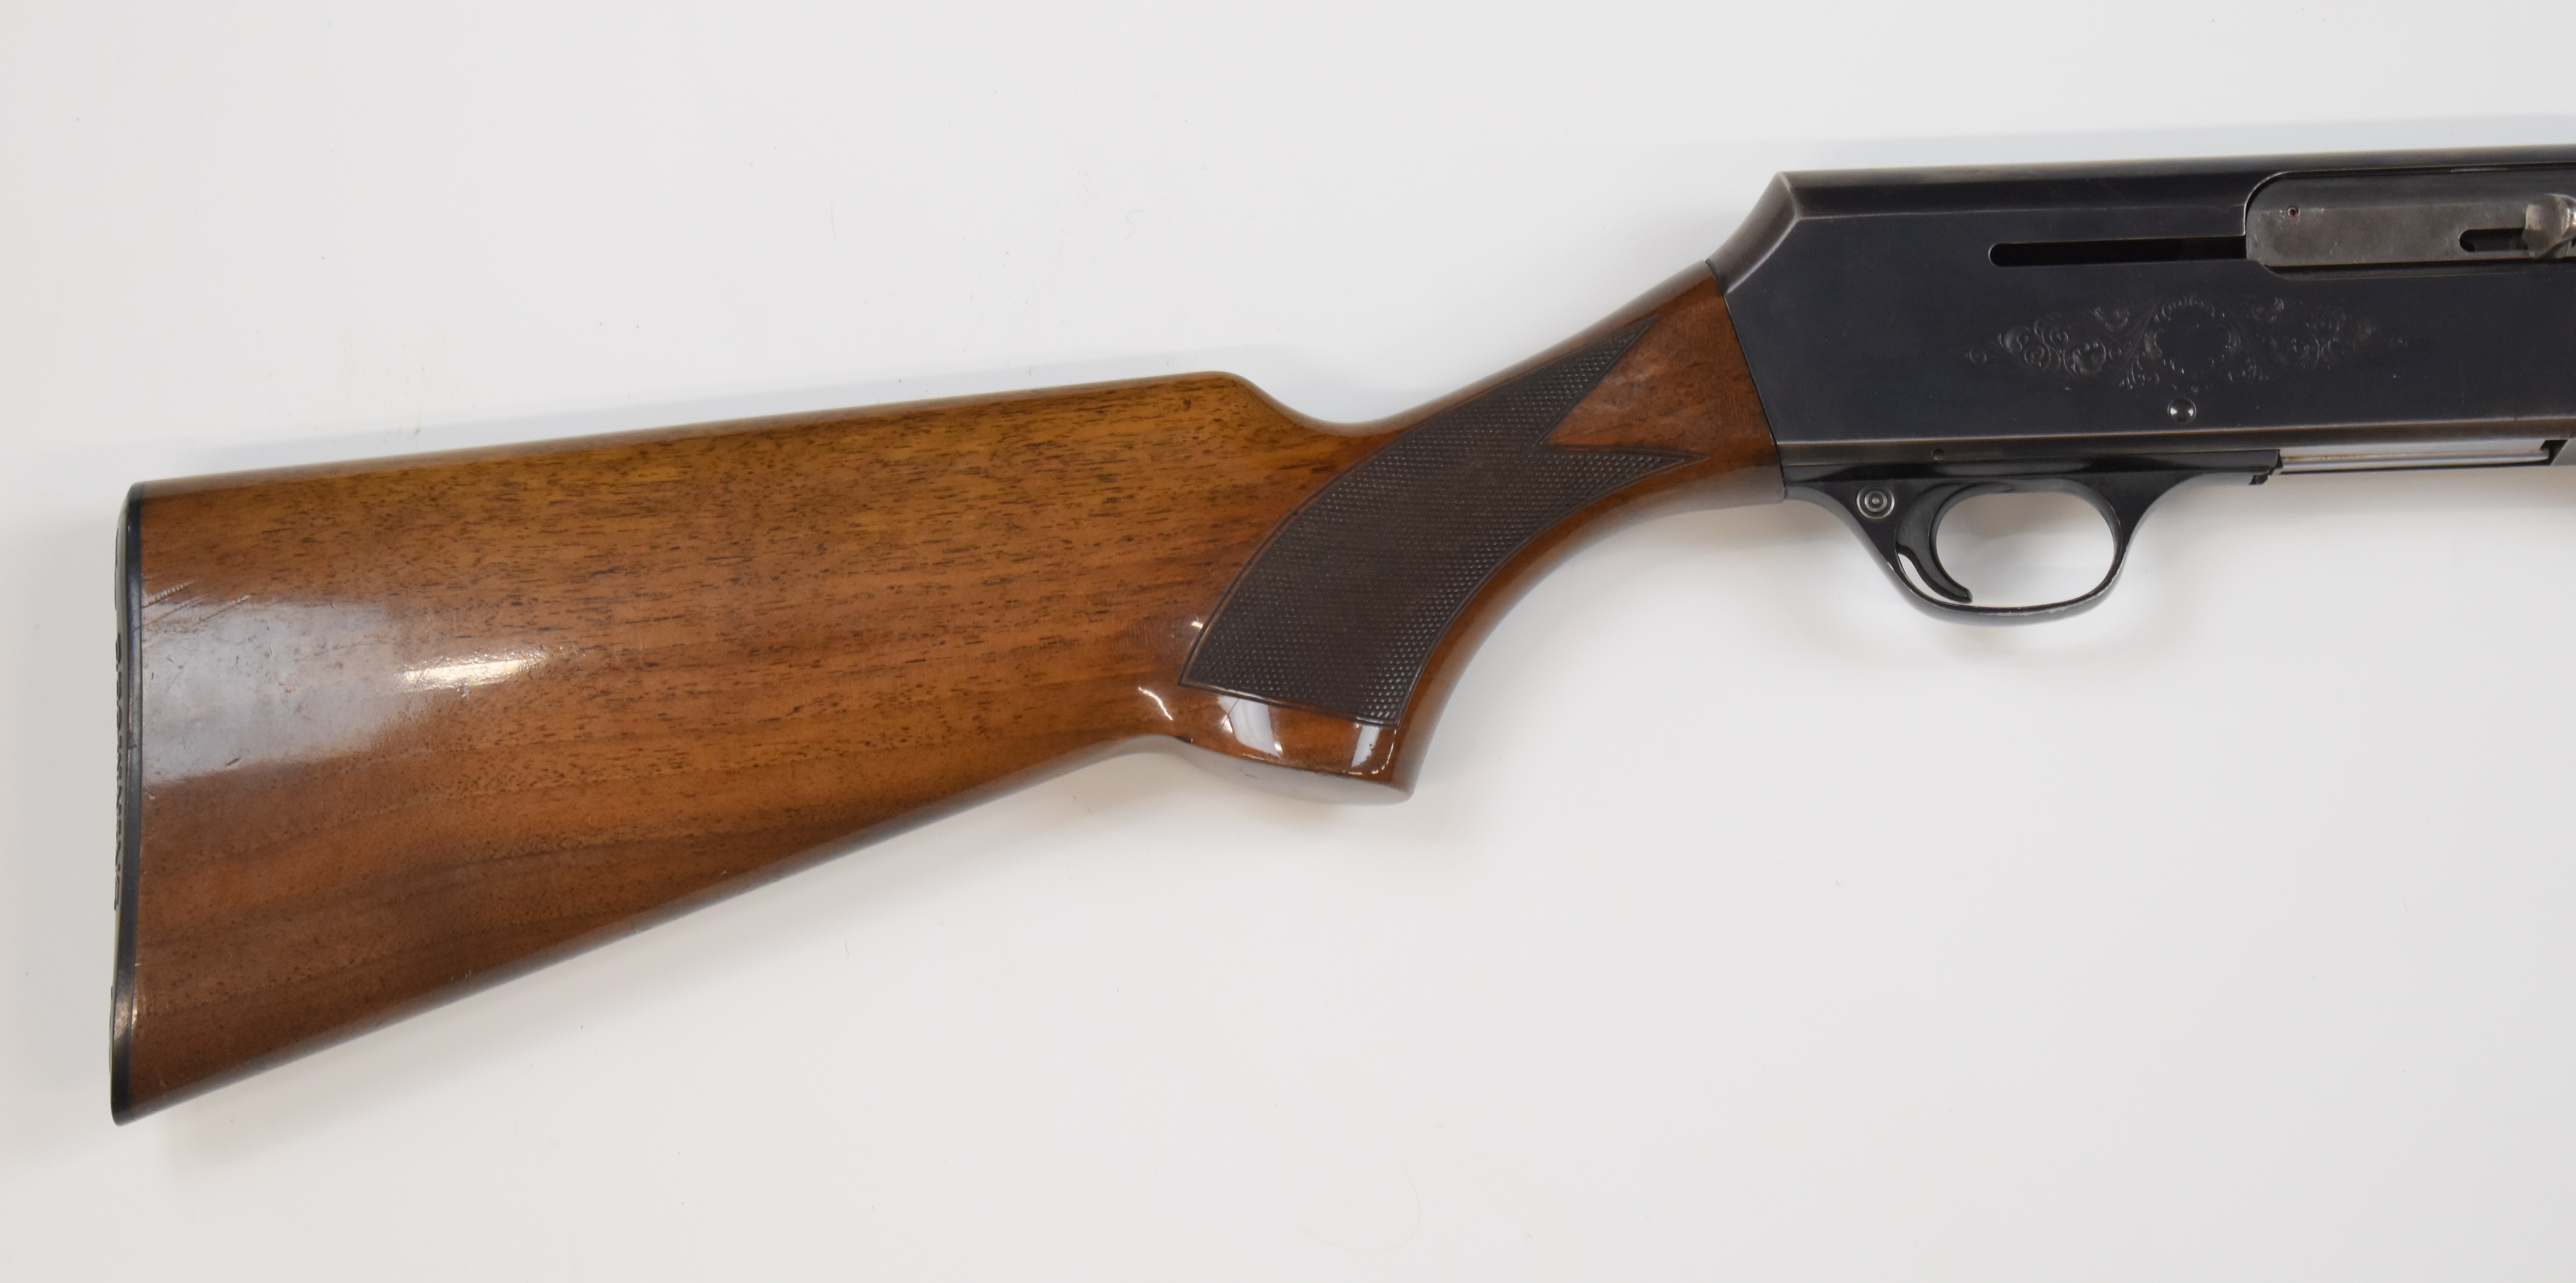 Browning 2000 12 bore 3-shot semi-automatic shotgun with named and engraved lock, chequered semi- - Image 3 of 11